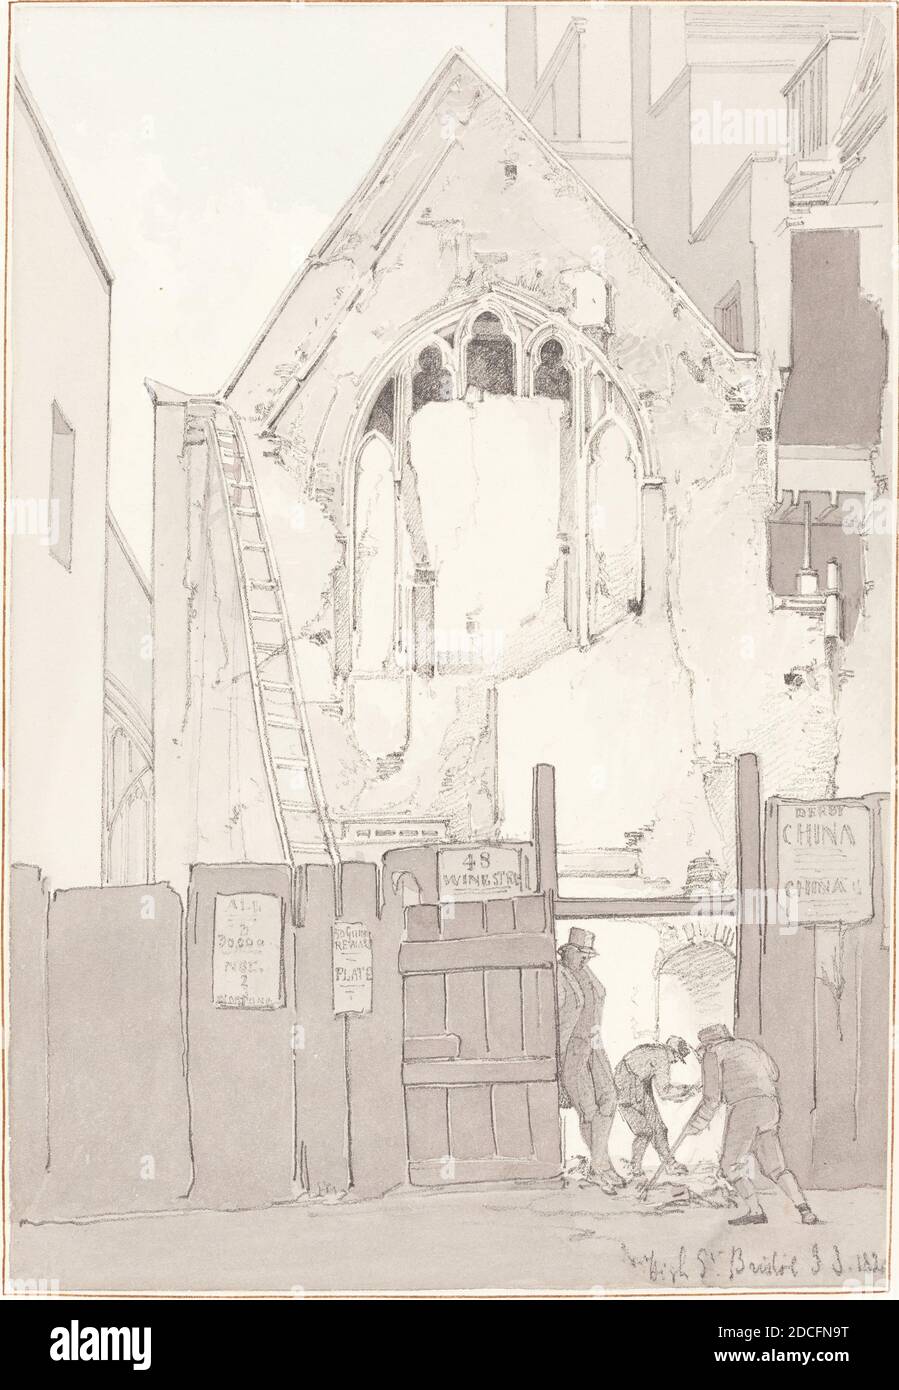 James Johnson, (artist), British, 1803 - 1834, The Discovery of an East Window of All Saints’ Church, behind High Street, Bristol, 1821, watercolor and graphite on wove paper, Overall: 24 x 16.5 cm (9 7/16 x 6 1/2 in.), support: 43.4 x 34.2 cm (17 1/16 x 13 7/16 in Stock Photo